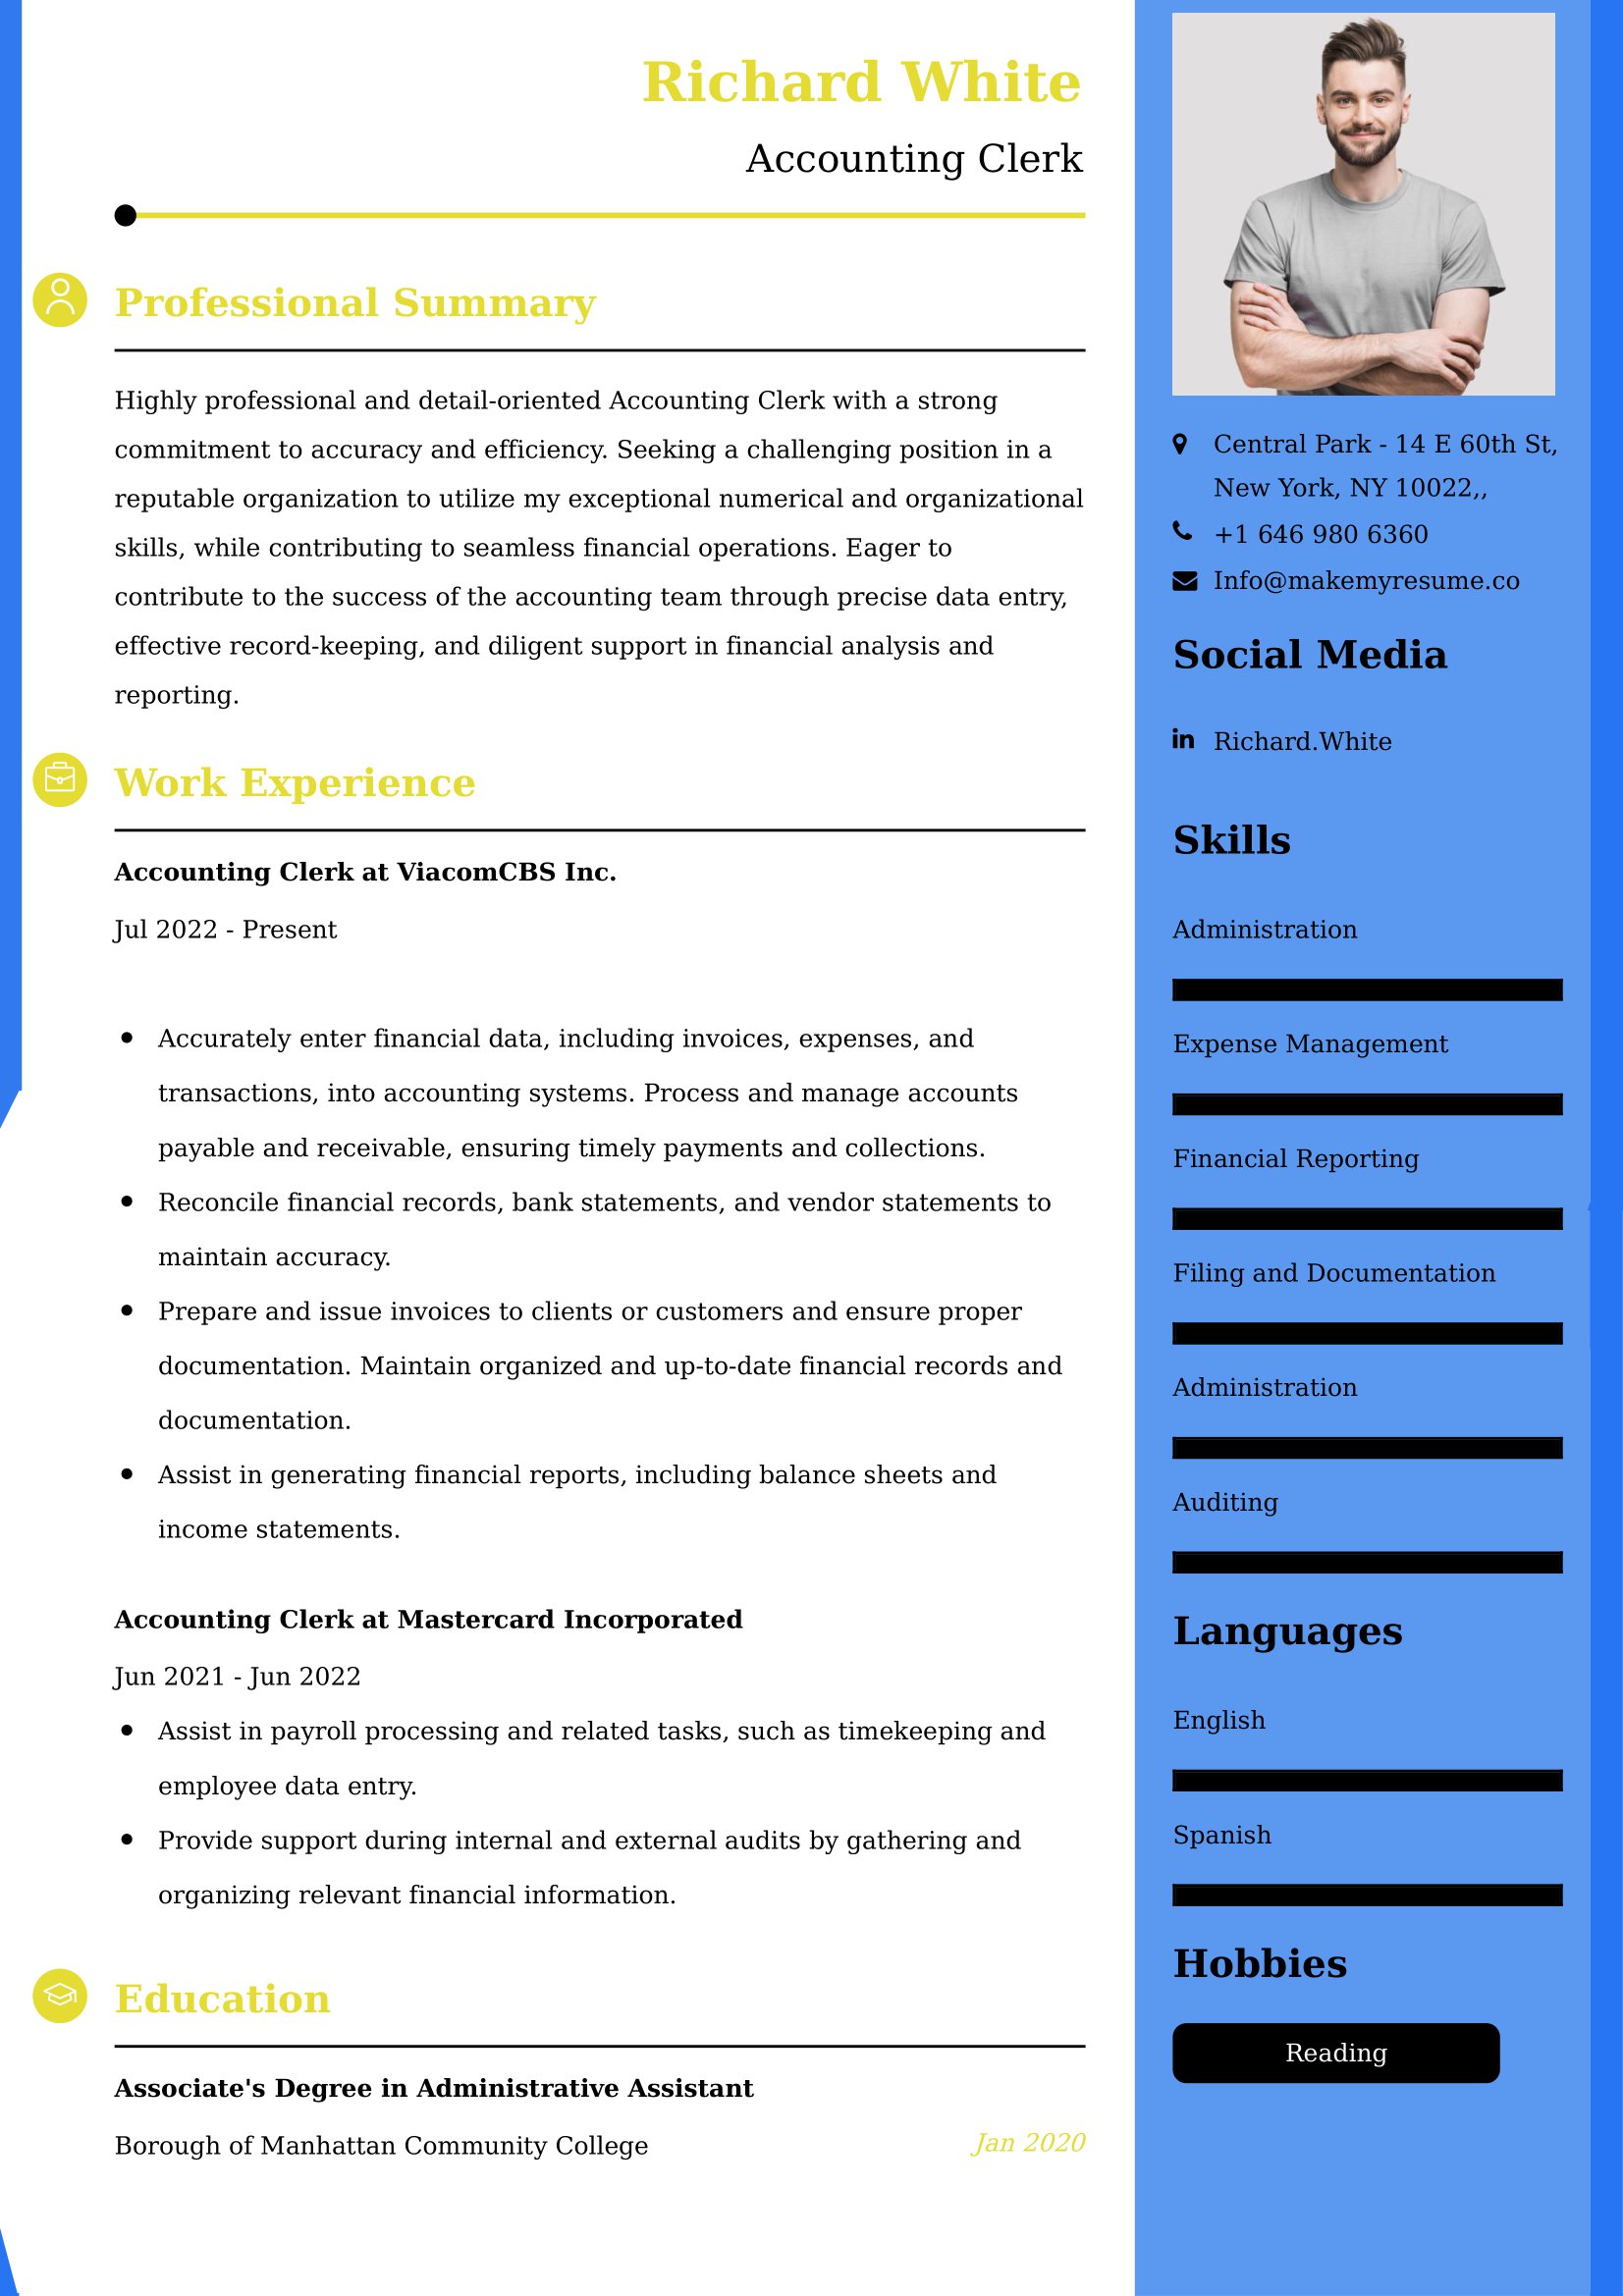 Accounting Clerk Resume Examples - Brazilian Format, Latest Template